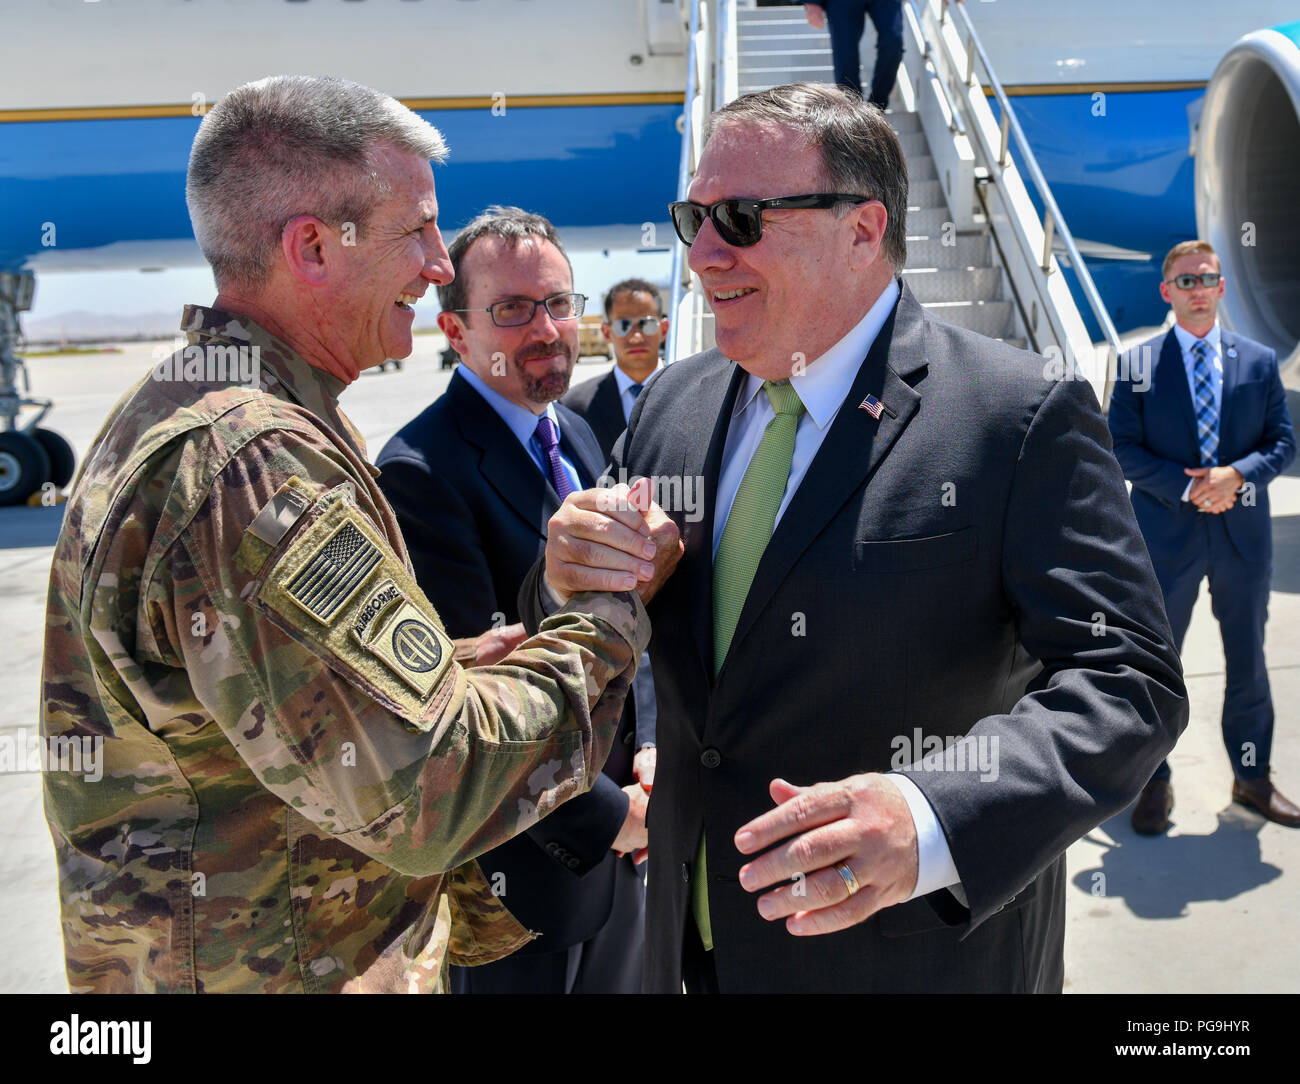 U.S. Secretary of State Michael R. Pompeo is greeted by General John Nicholson upon arrival to Bagram Airfield on July 9, 2018. Stock Photo